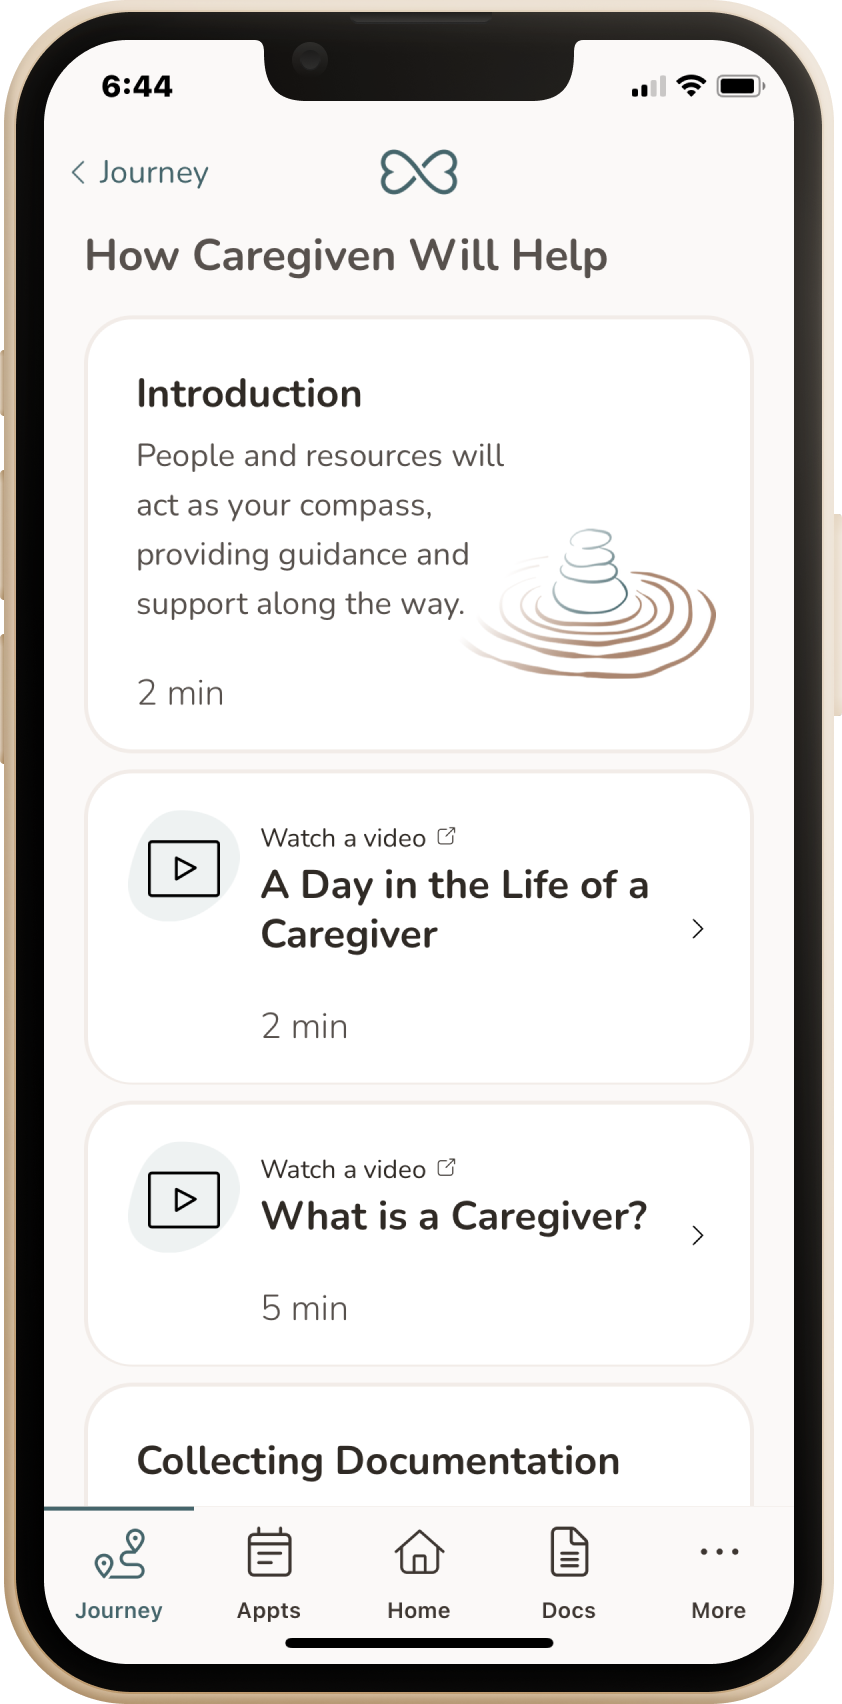 Journey - How Caregiven Will Help (1)